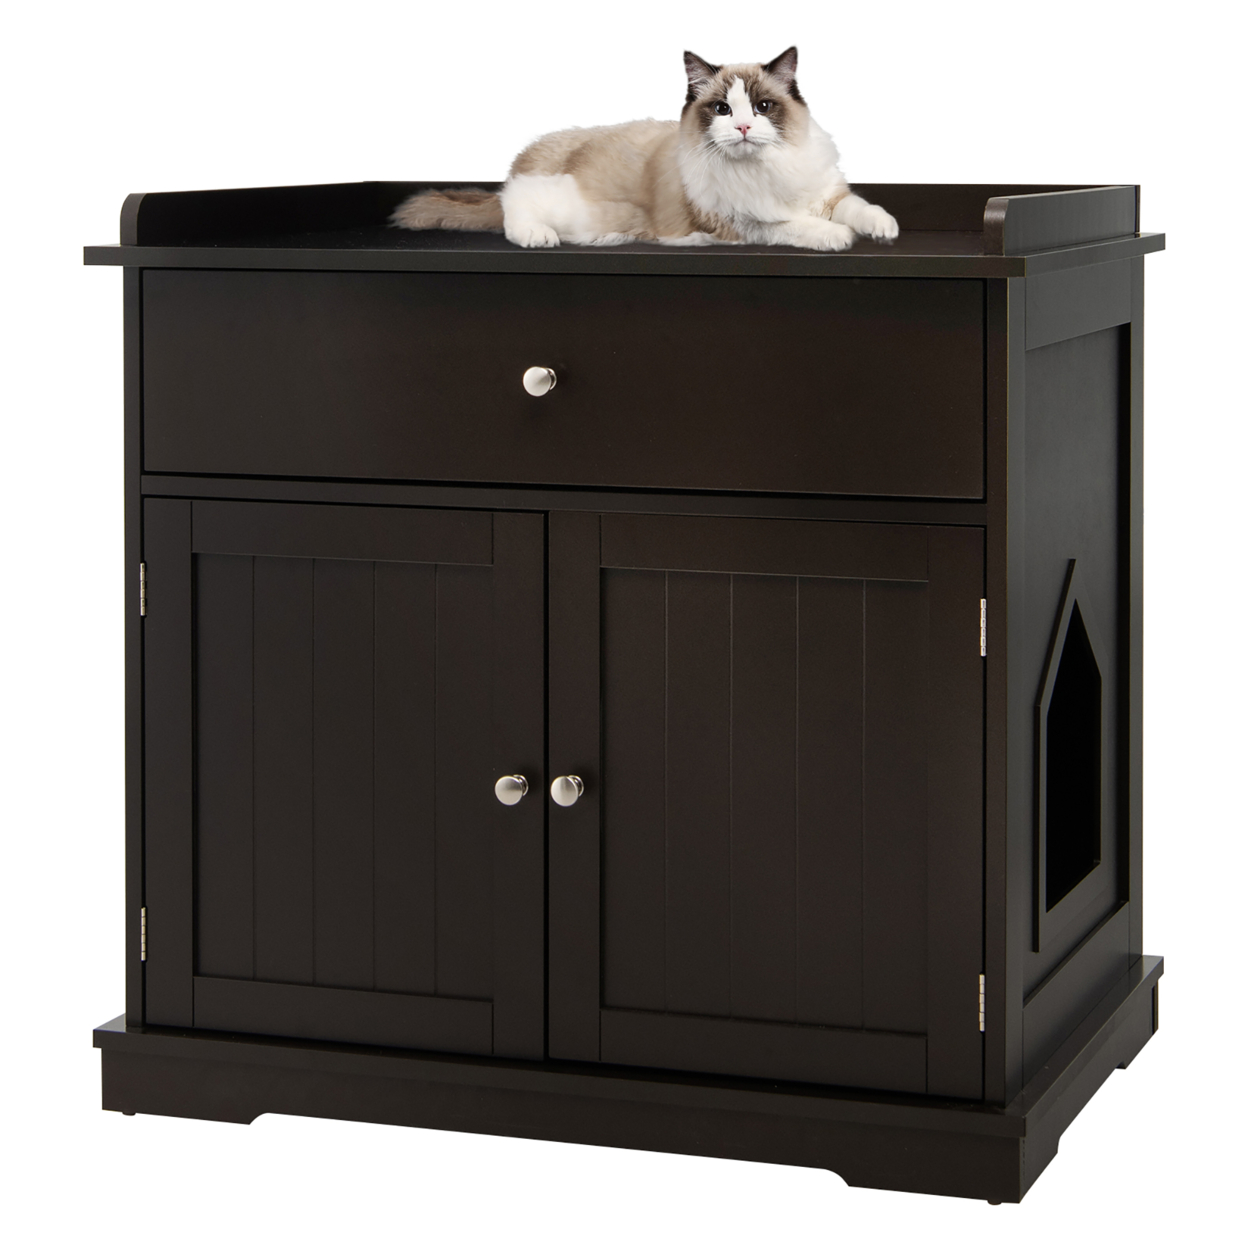 Wooden Cat Litter Box Enclosure W/ Drawer Side Table Furniture - Coffee